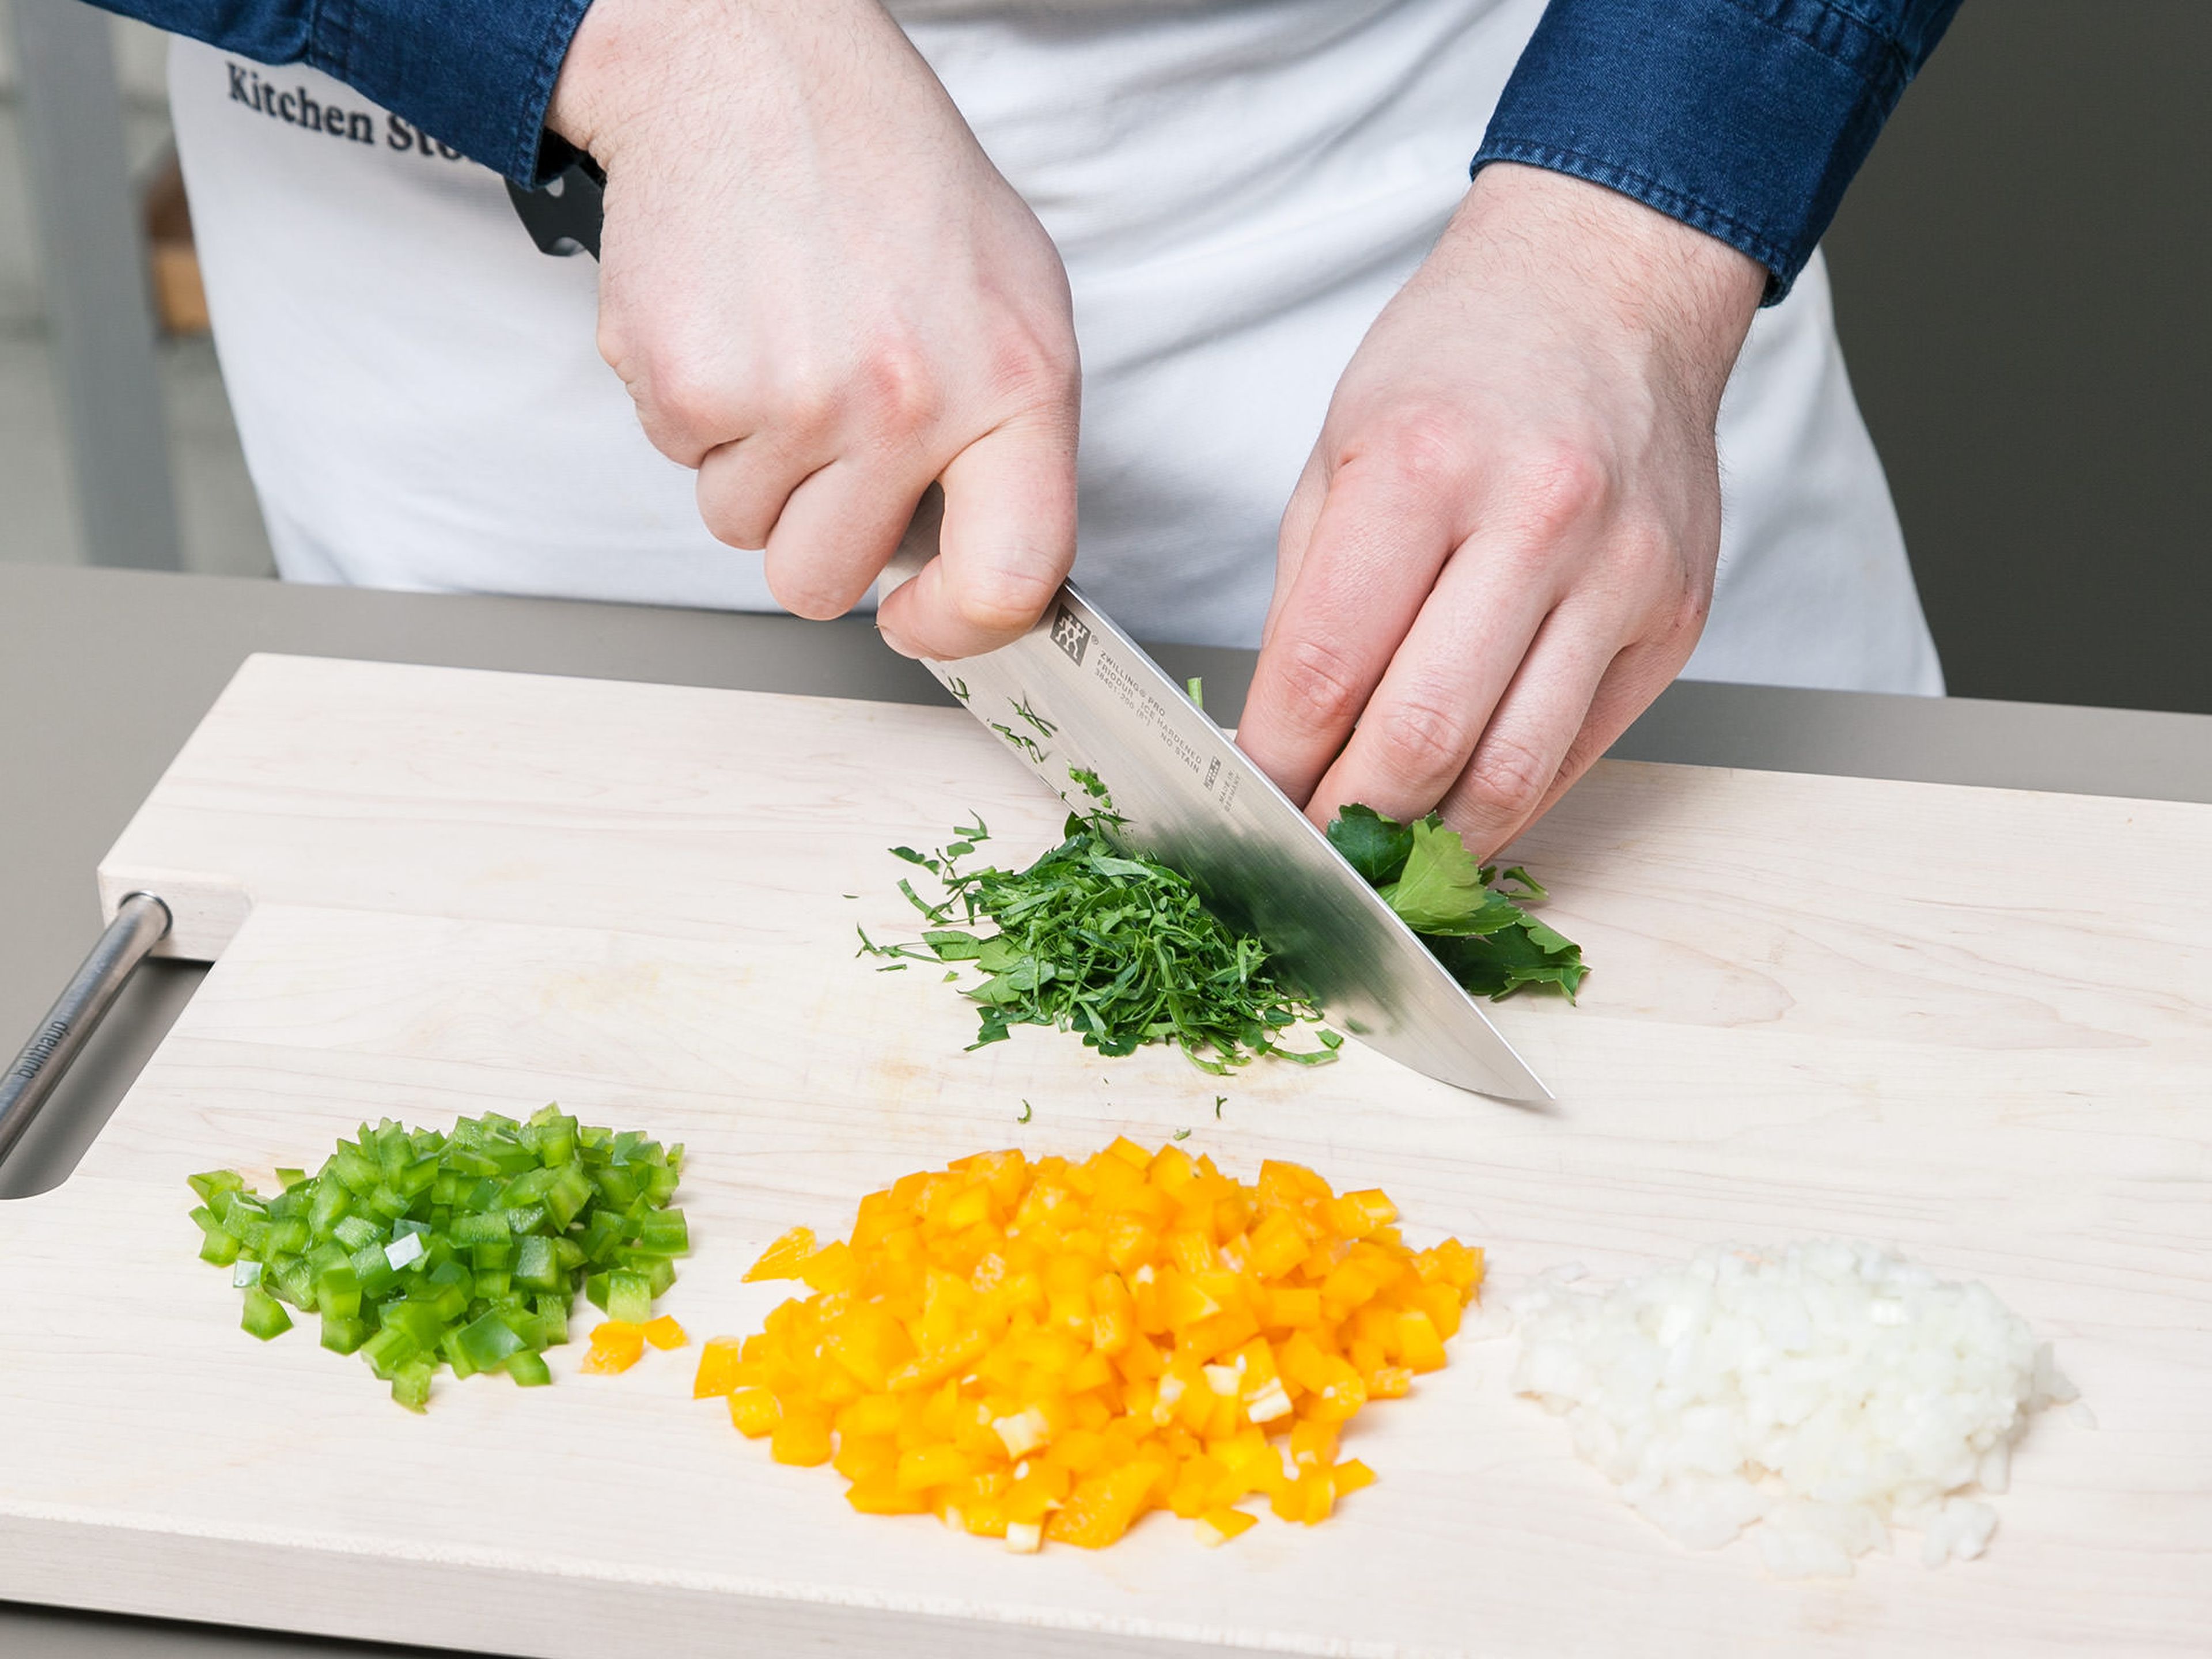 Peel and mince onion. Wash yellow and green bell pepper, remove seeds and finely dice. Pluck parsley leaves from the stems and finely chop.